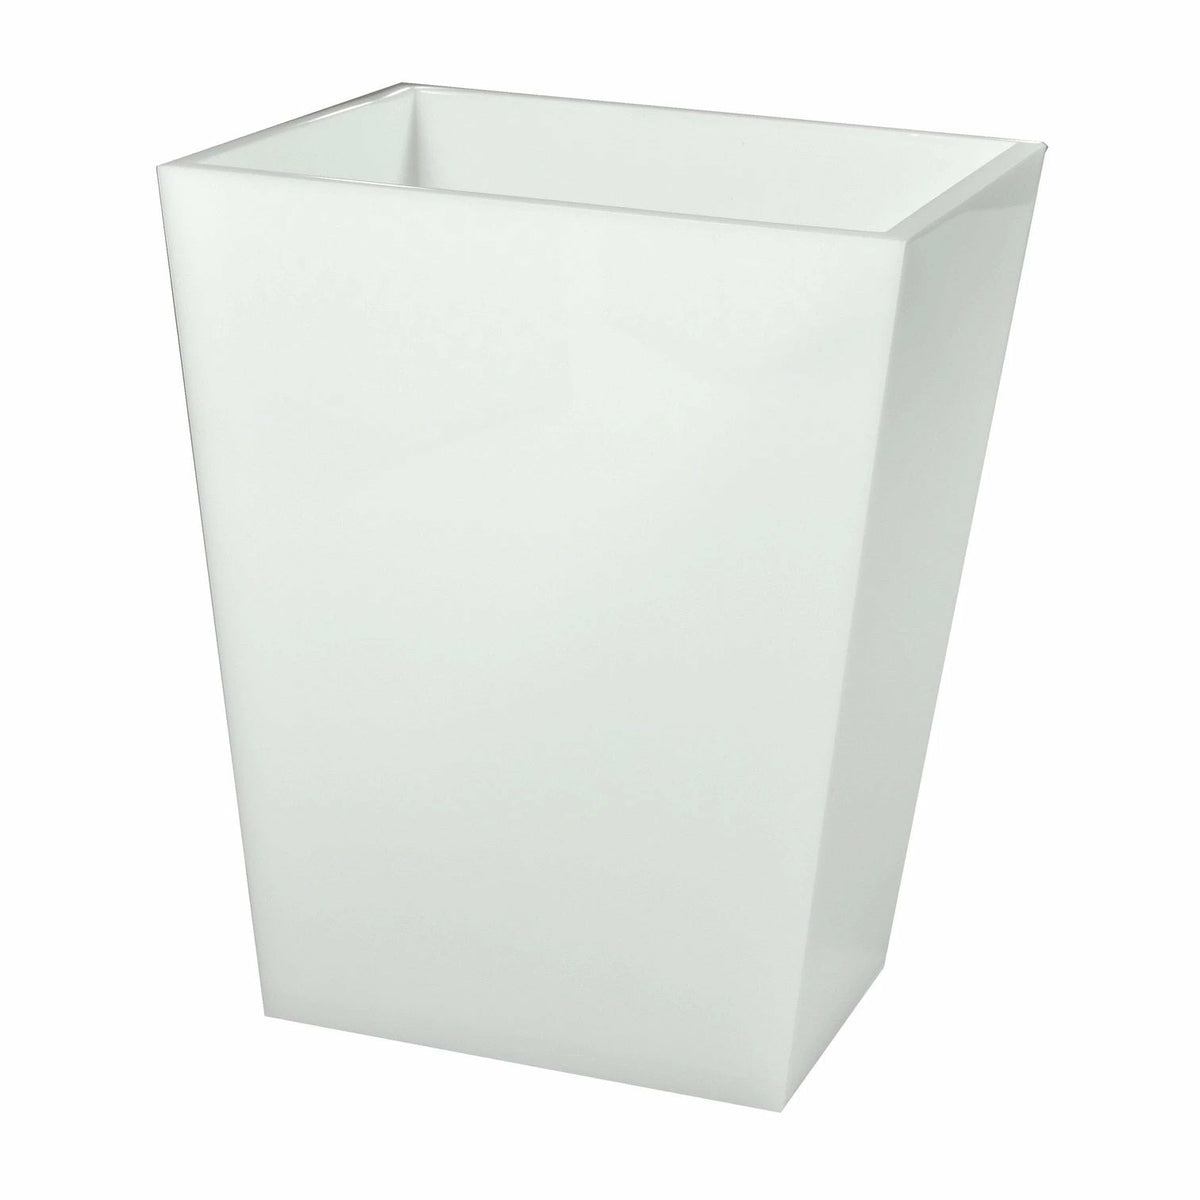 Mike and Ally Ice Lucite Bath Accessories Wastebasket White